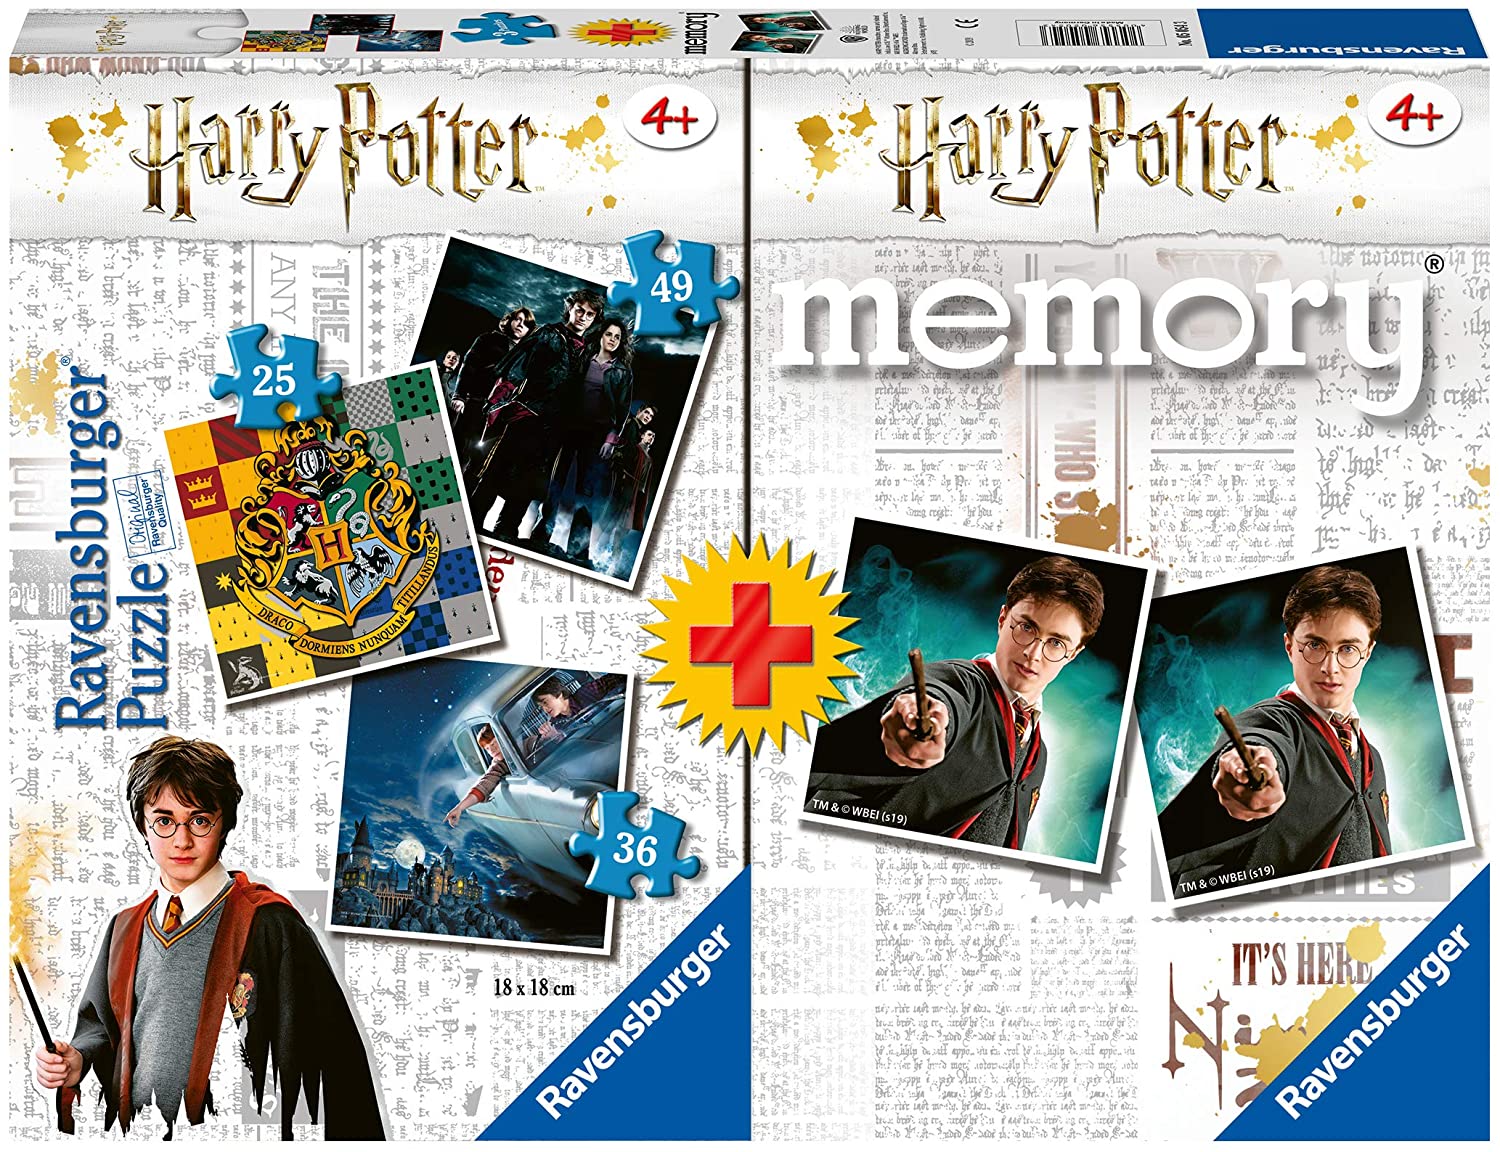 Ravensburger-Multipack Memory 3 Puzzle Harry Potter (05054) - Assorted Colo